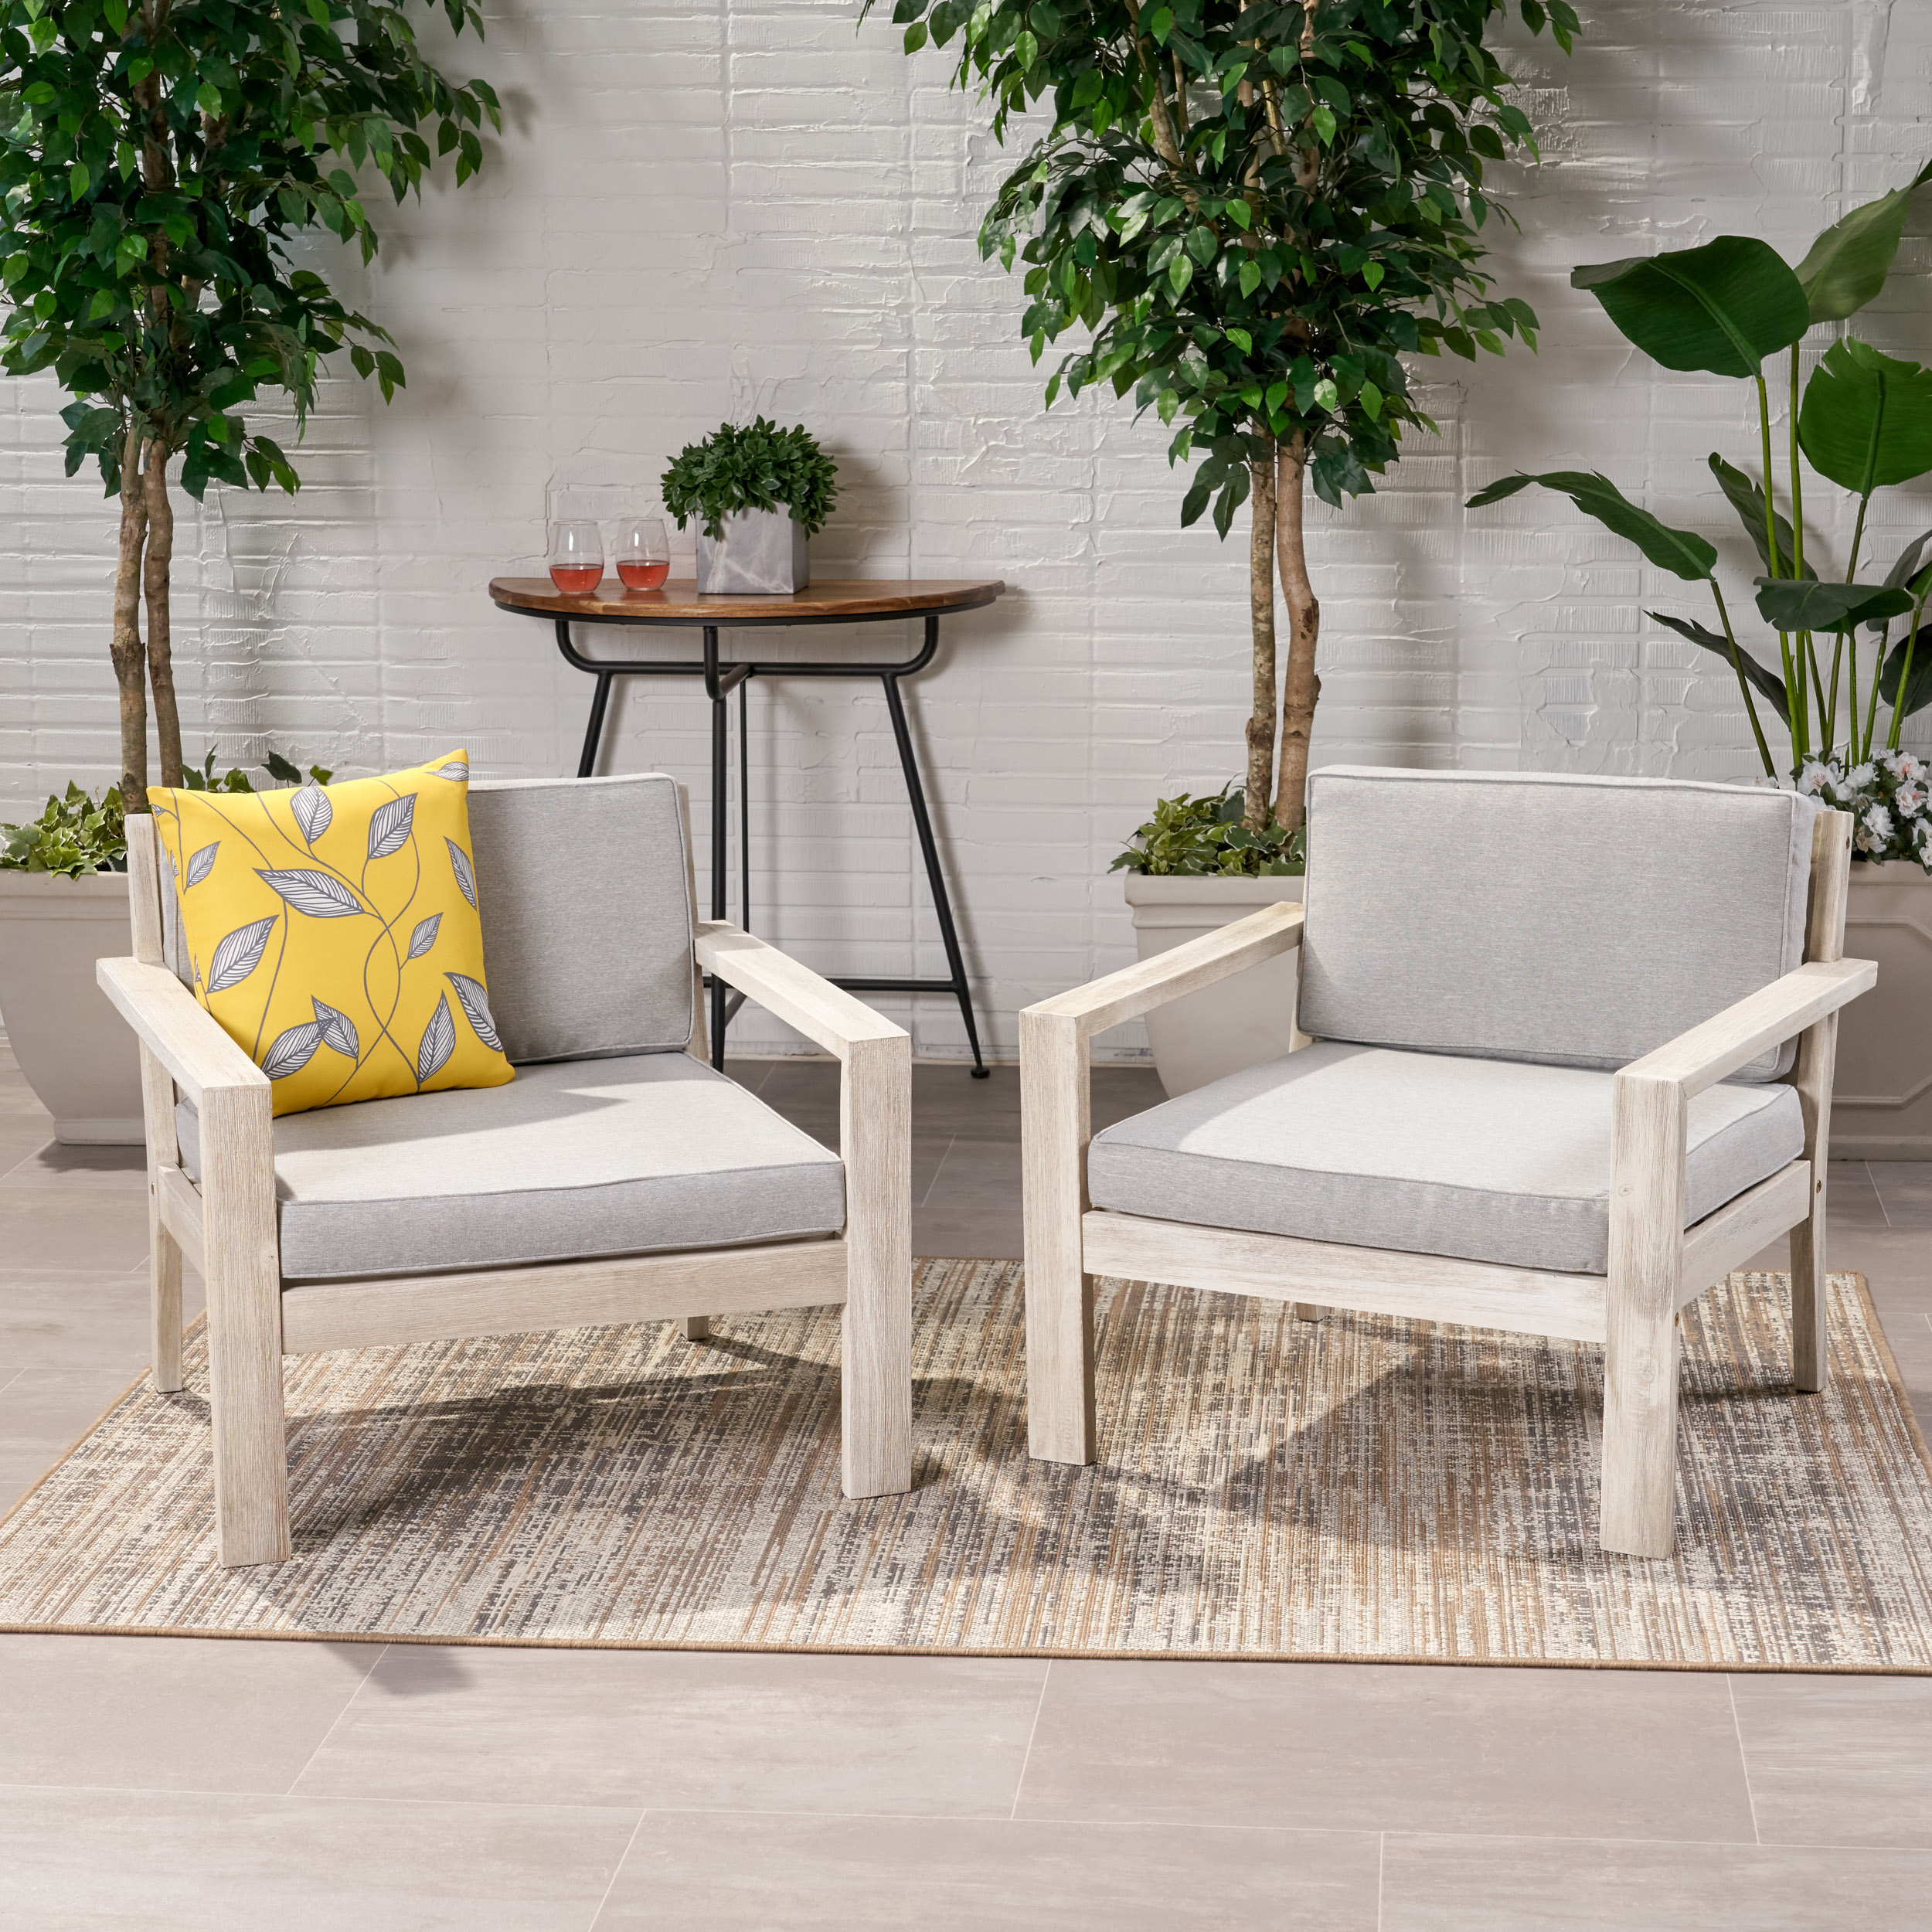 Beryl Outdoor Acacia Wood Club Chairs With Cushions (Set Of 2) - Brushed Light Gray Wash, Dark Gray